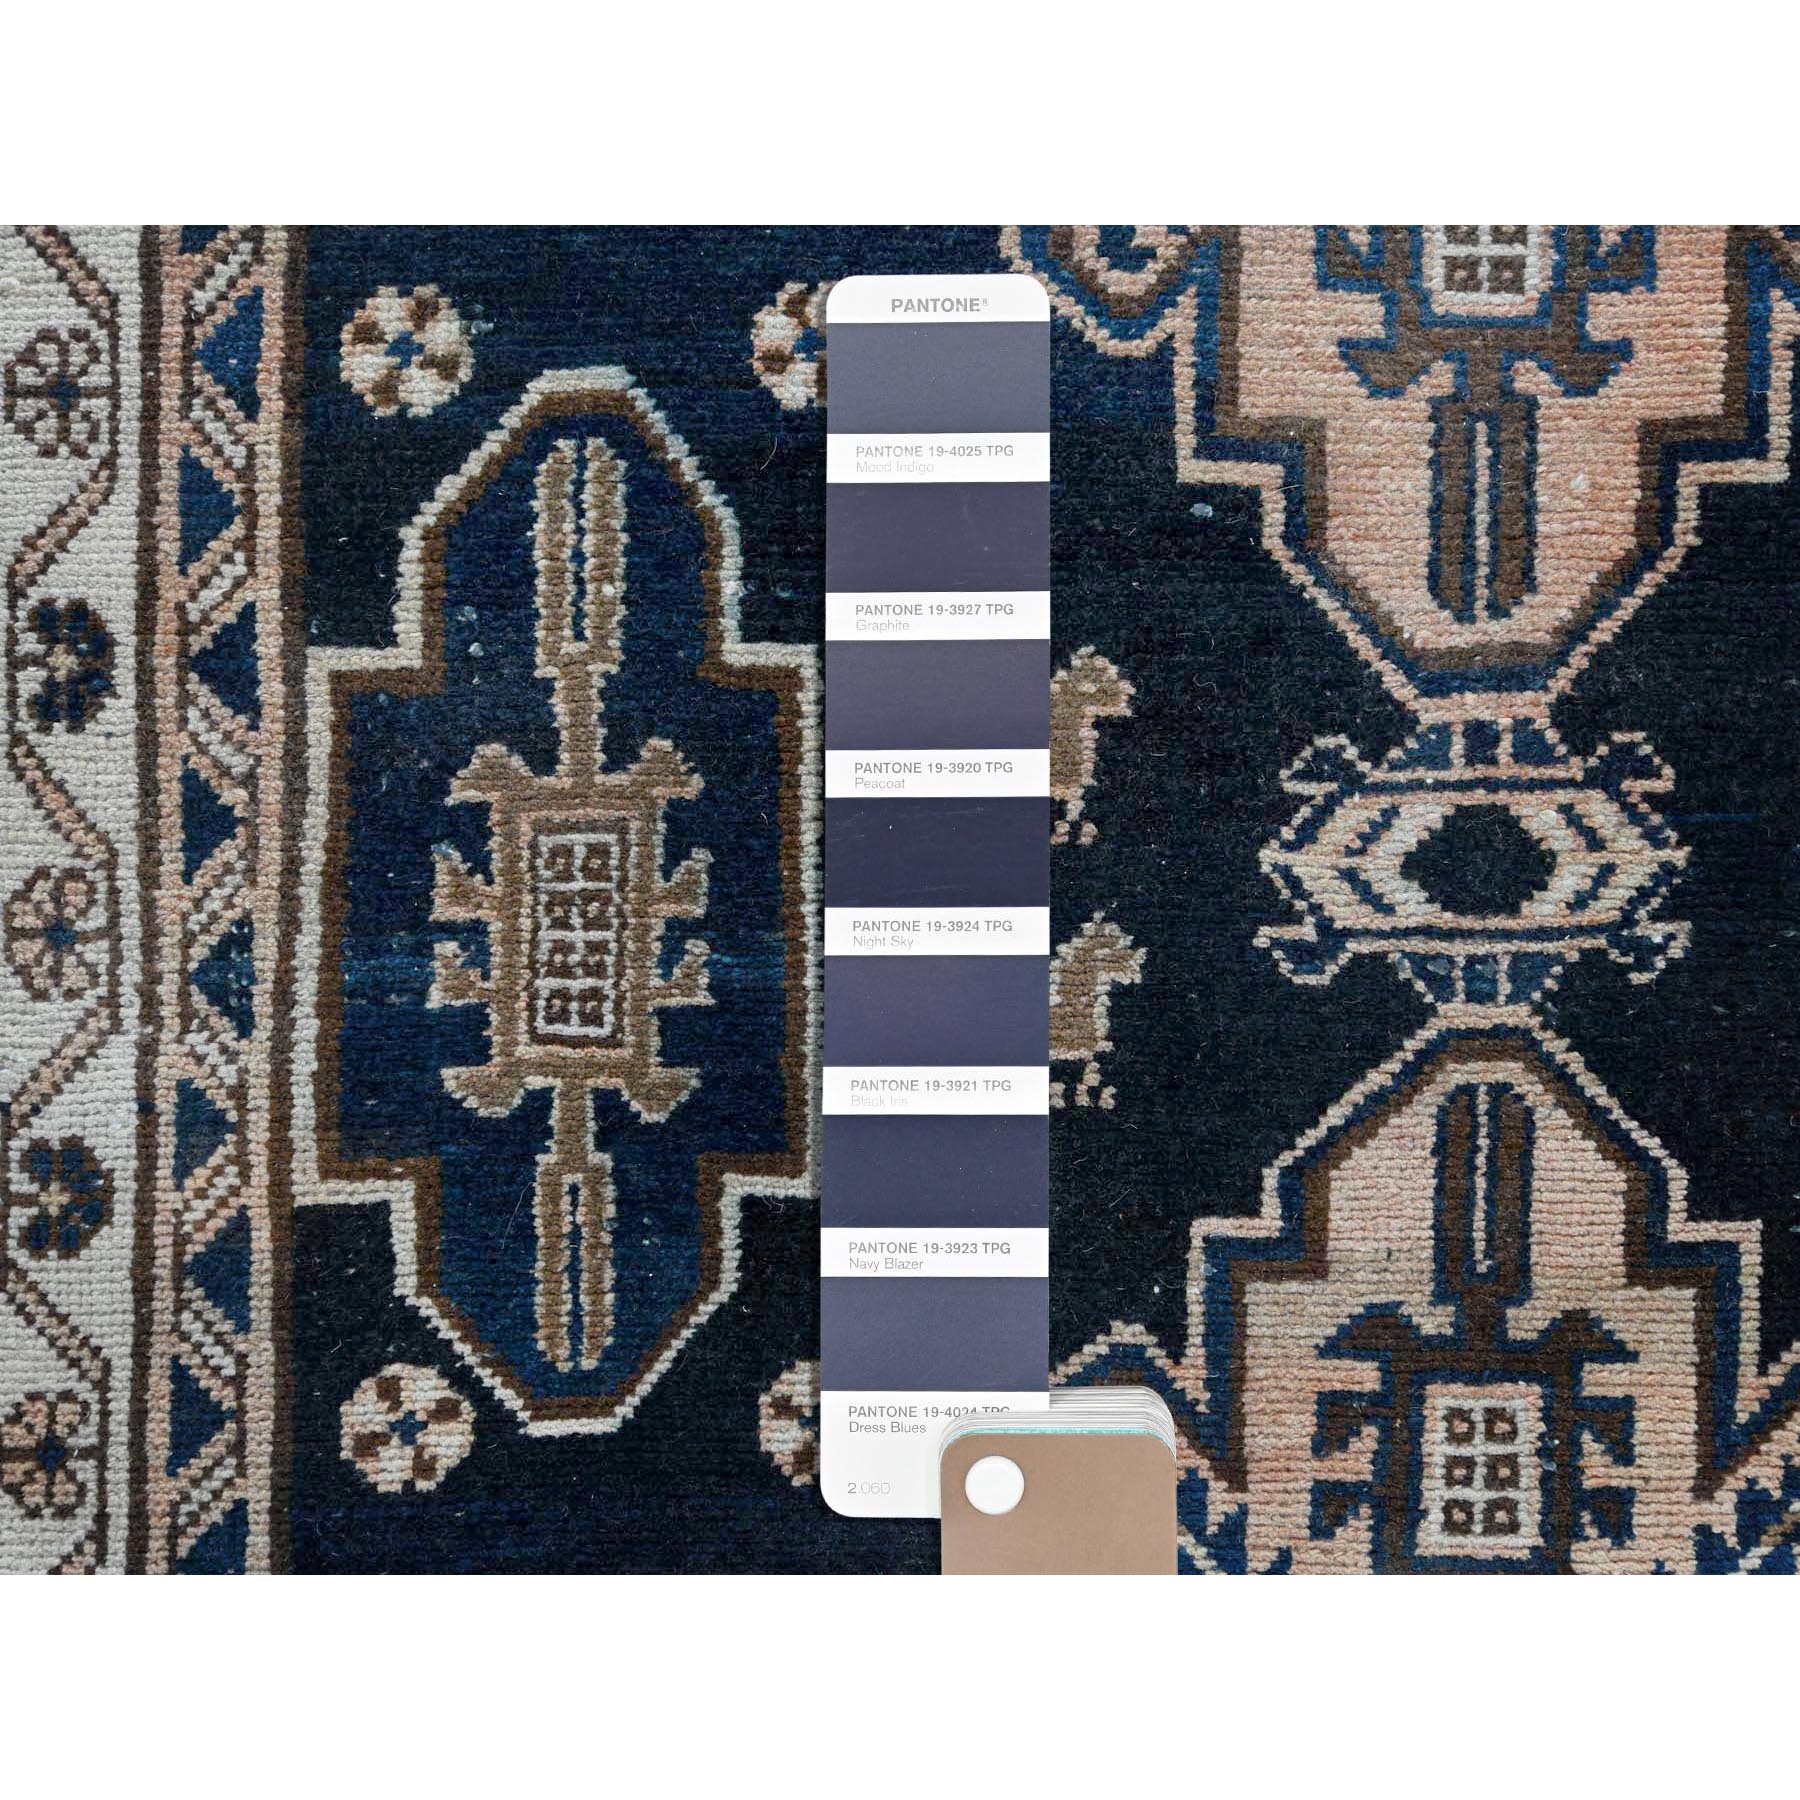 3'5"x9'7" Midnight Blue, Vintage Persian Malayer with Small Bird Figurines, Abrash, Distressed, Sheared Low Hand Woven Pure Wool Wide Runner Oriental Rug 